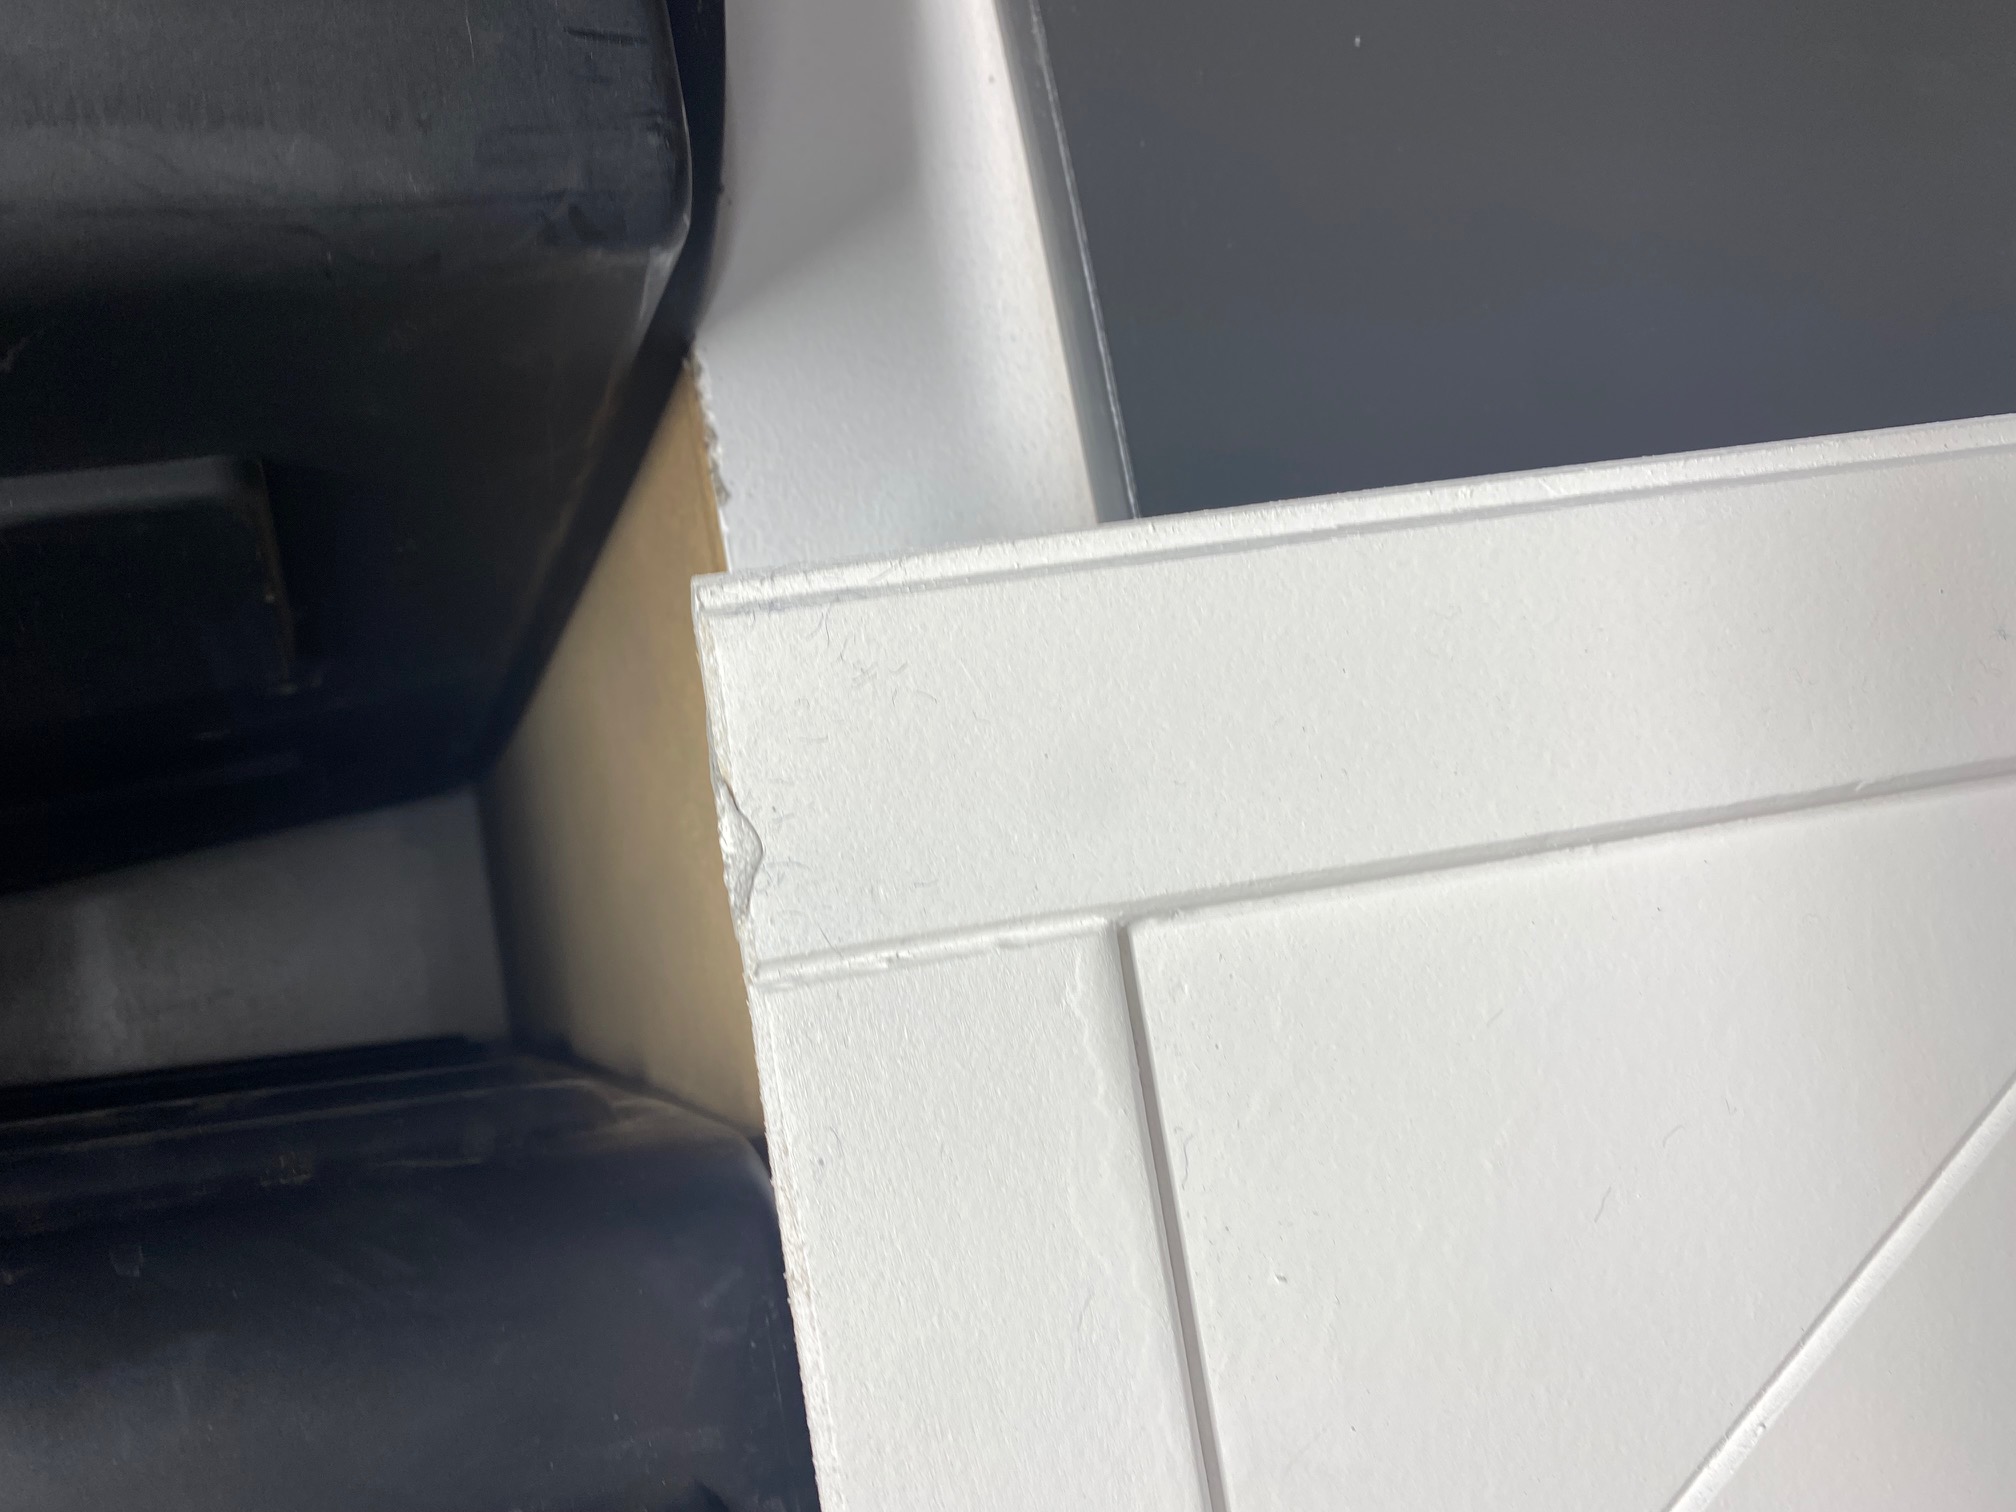 Paint Issue